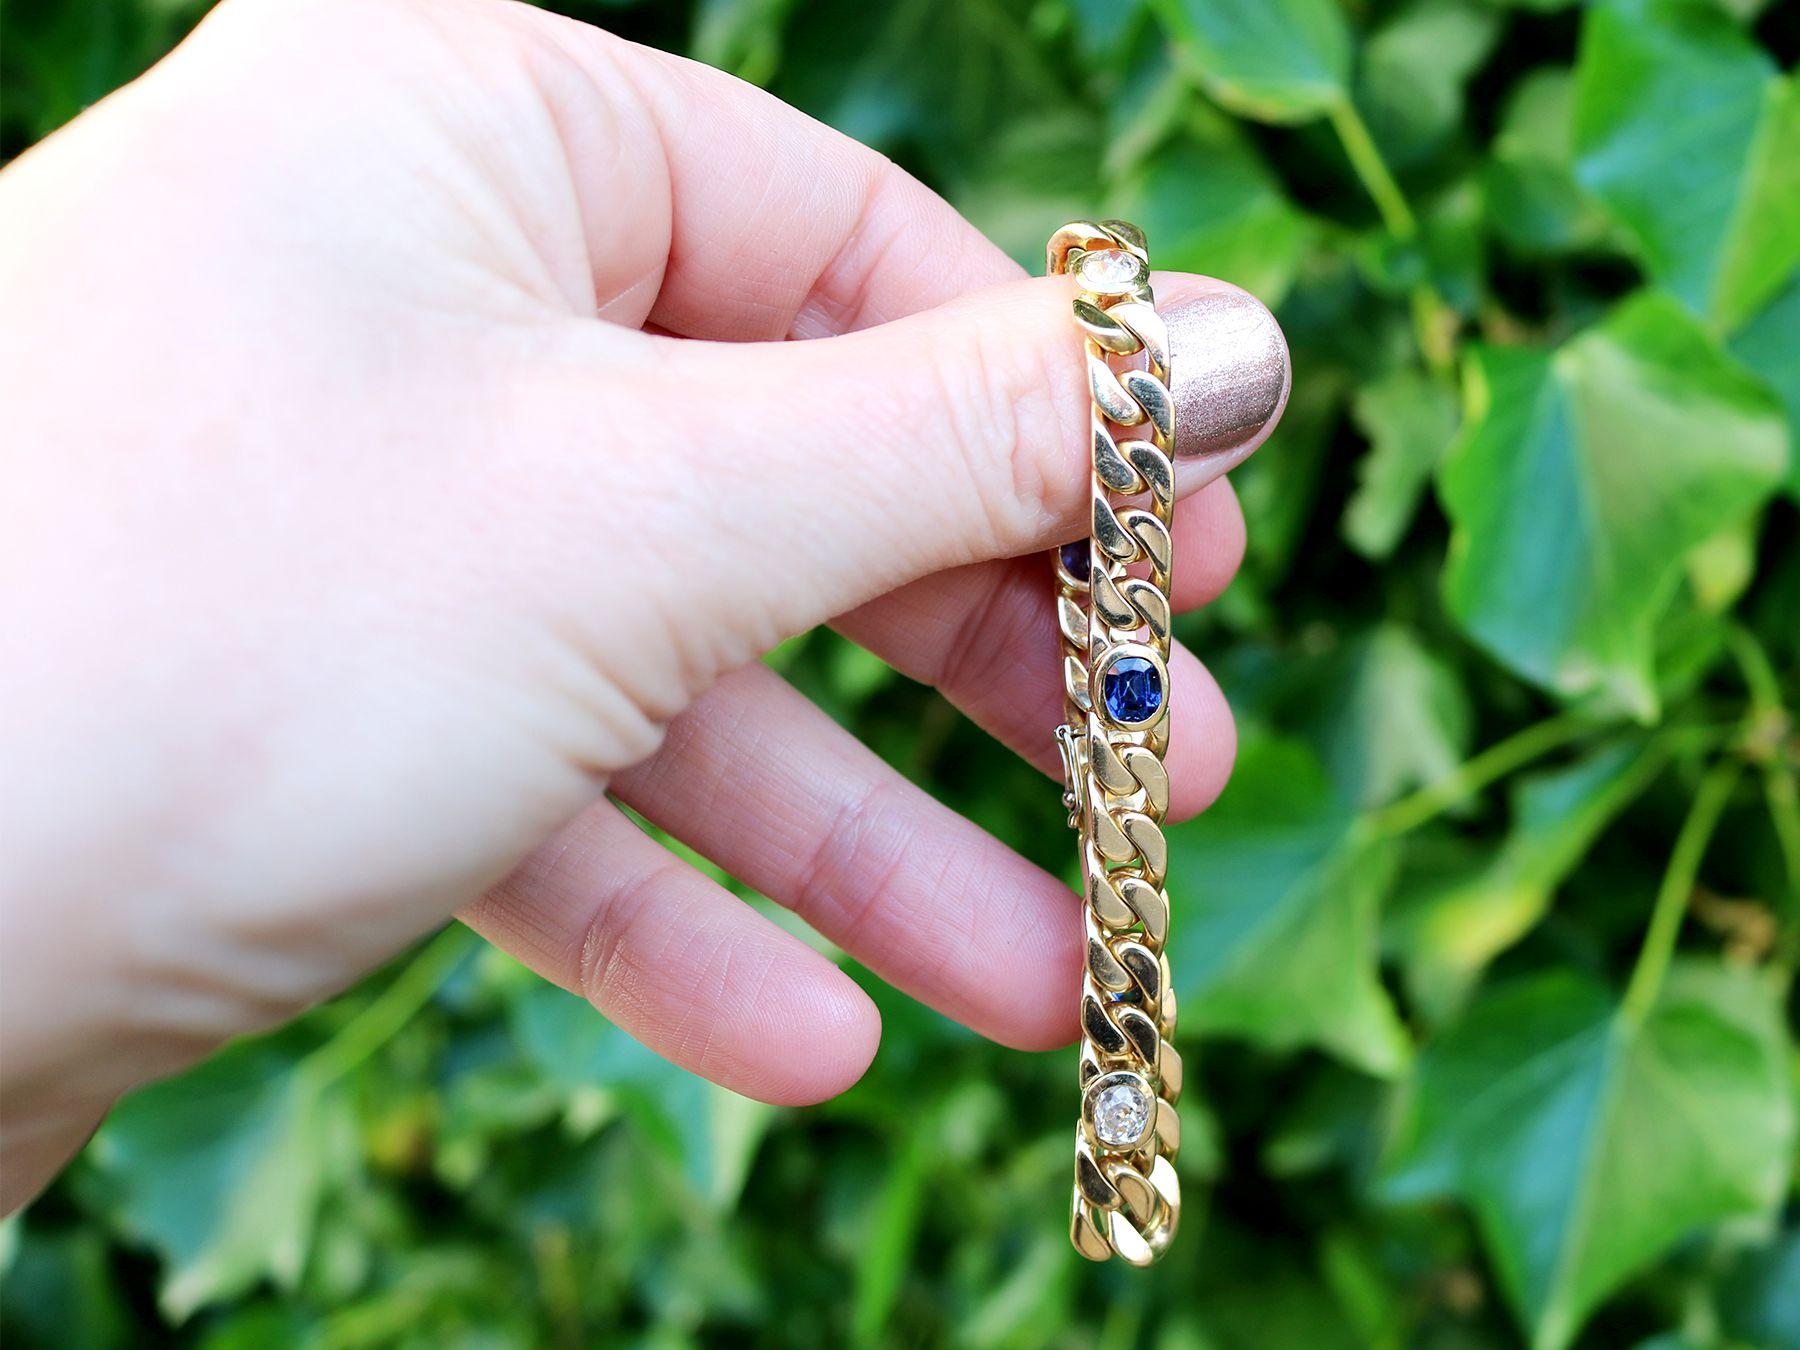 A stunning, fine and impressive 1.30 carat natural blue sapphire and 1.02 carat diamond, 18 karat yellow gold curb link bracelet; part of our diverse vintage jewelry and estate jewelry collections.

This stunning, fine and impressive sapphire and